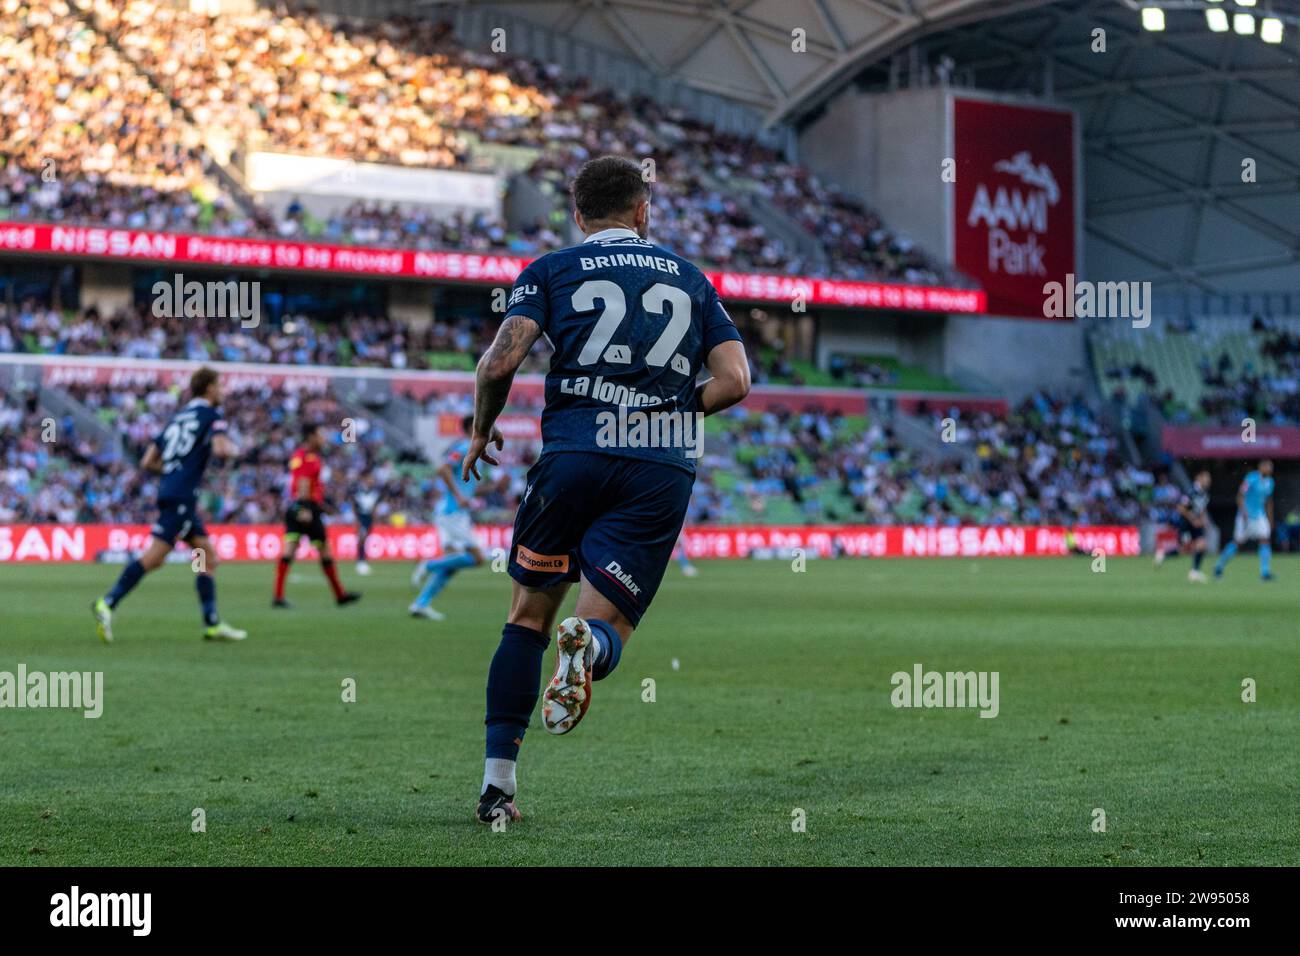 Melbourne, Australia. 23 December, 2023. Melbourne Victory FC Midfielder Jake Brimmer (#22) runs forwards for a counter attack during the Isuzu UTE A-League match between Melbourne City FC and Melbourne Victory FC at AAMI Park in Melbourne, Australia. Credit: James Forrester/Alamy Live News Stock Photo